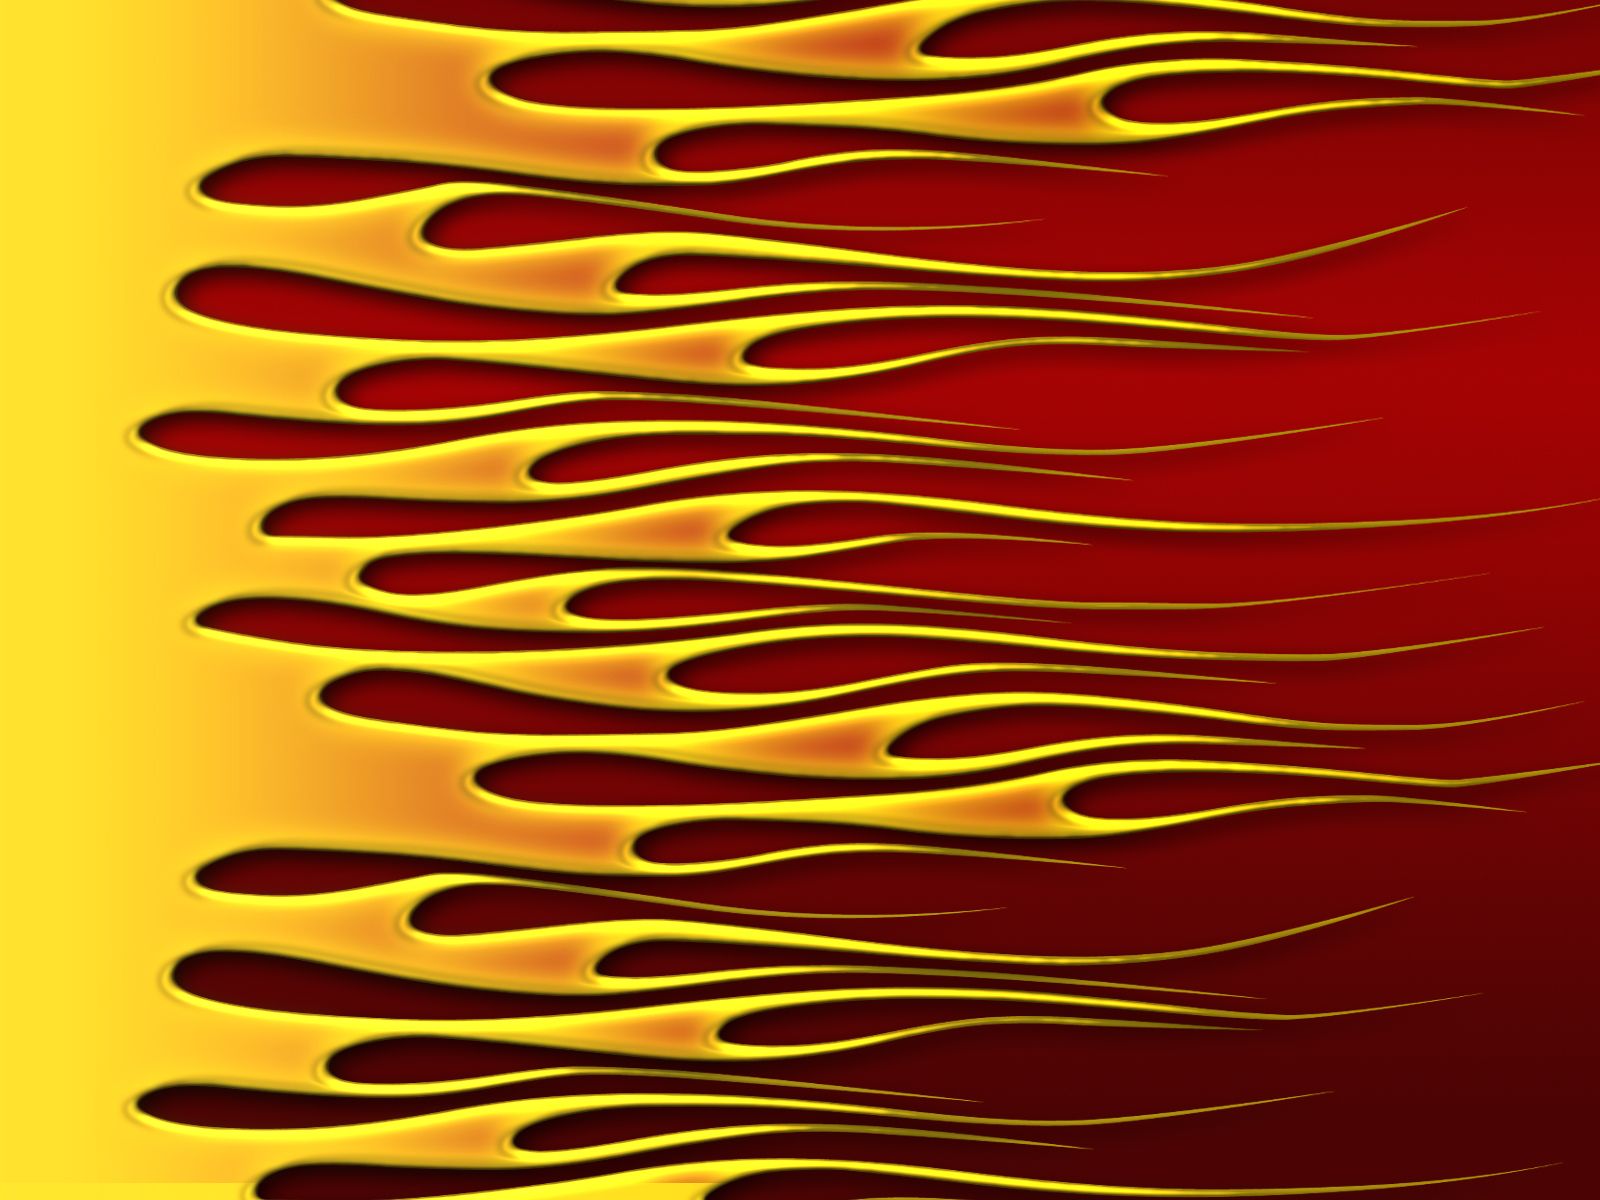 Free download Flames Gold on Red by jbensch [1600x1200] for your Desktop, Mobile & Tablet. Explore Live Flames Wallpaper. Blue Flame Wallpaper, Flames Wallpaper Background for Free, Animated Flame Desktop Wallpaper